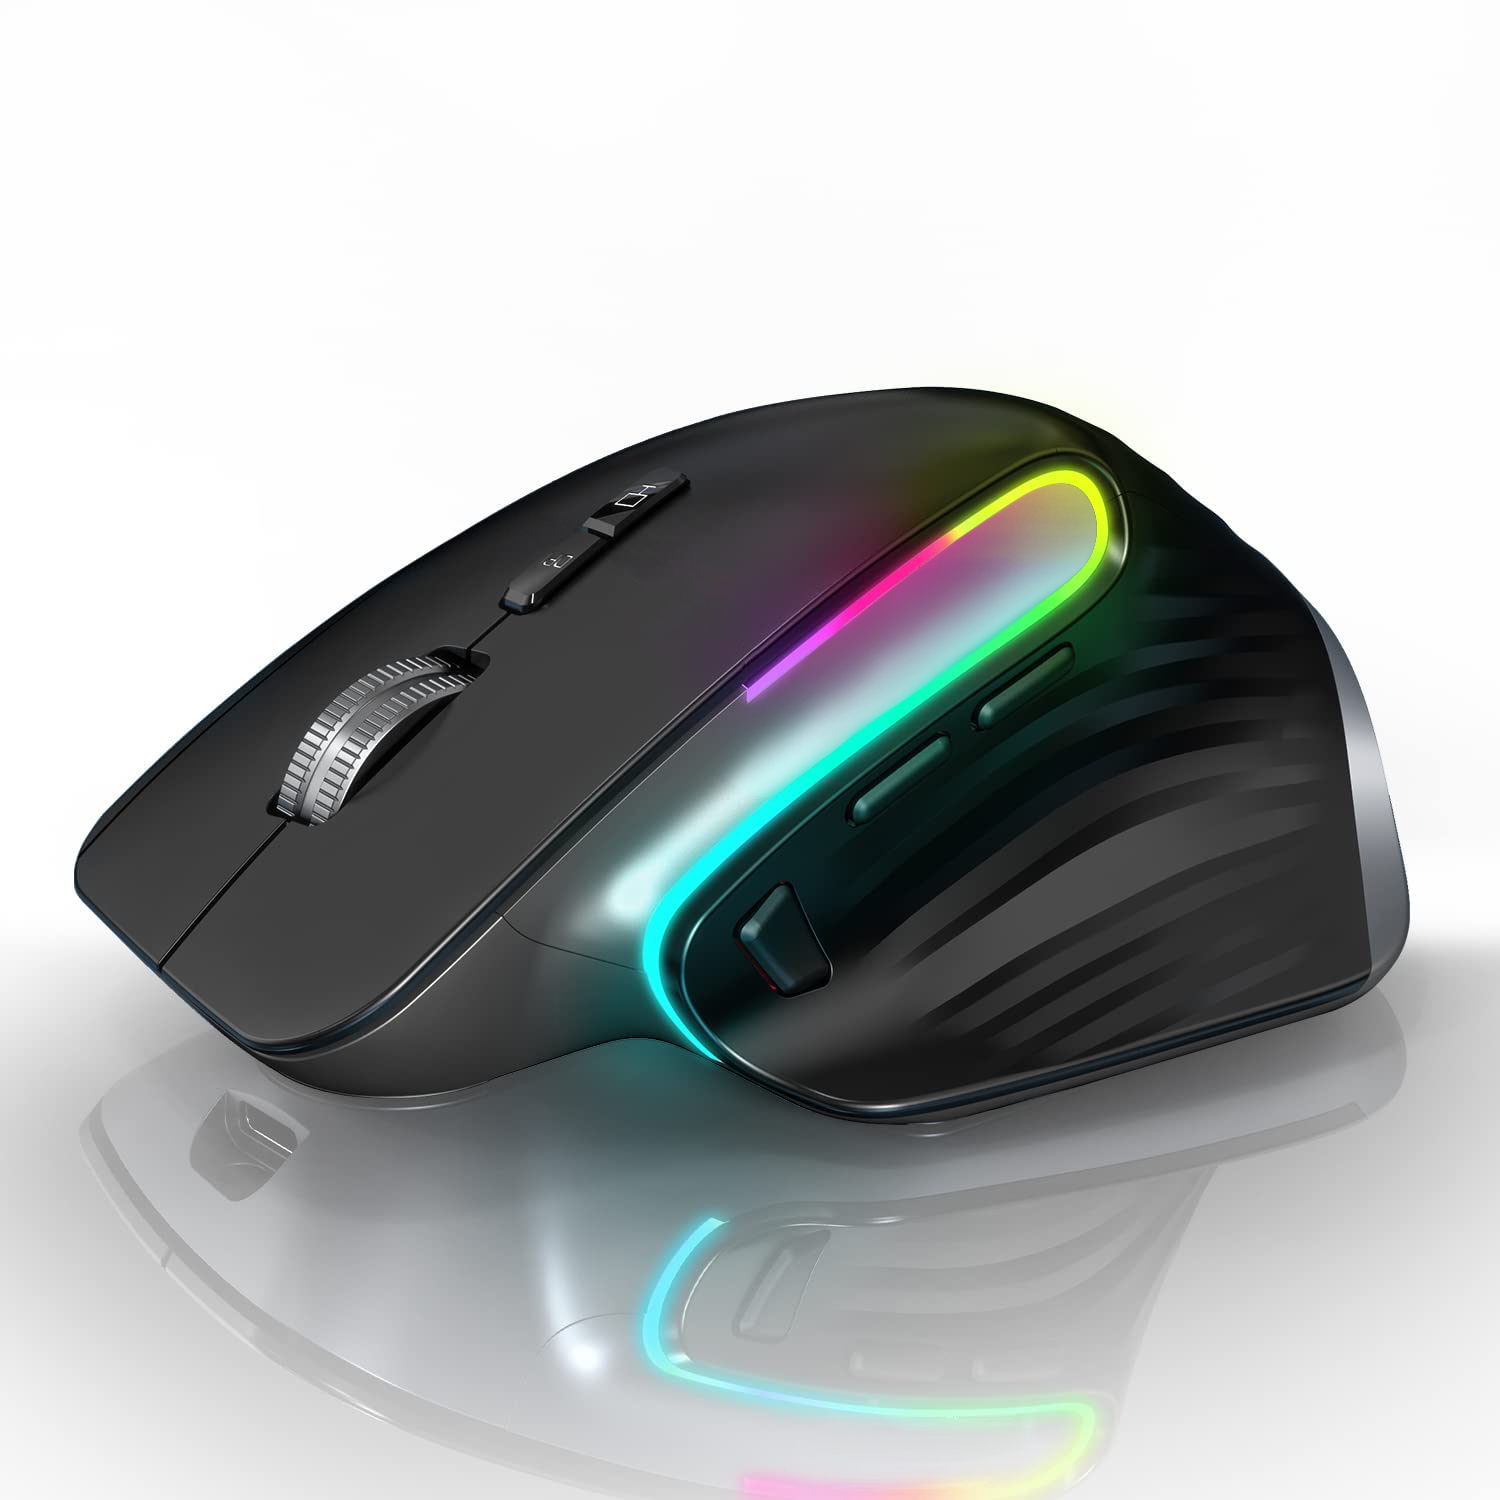 M10 Bluetooth LED Wireless Mouse,Ergonomic Optical Mouse Muted,Rechargeable 4000 DPI for Laptop,Supp